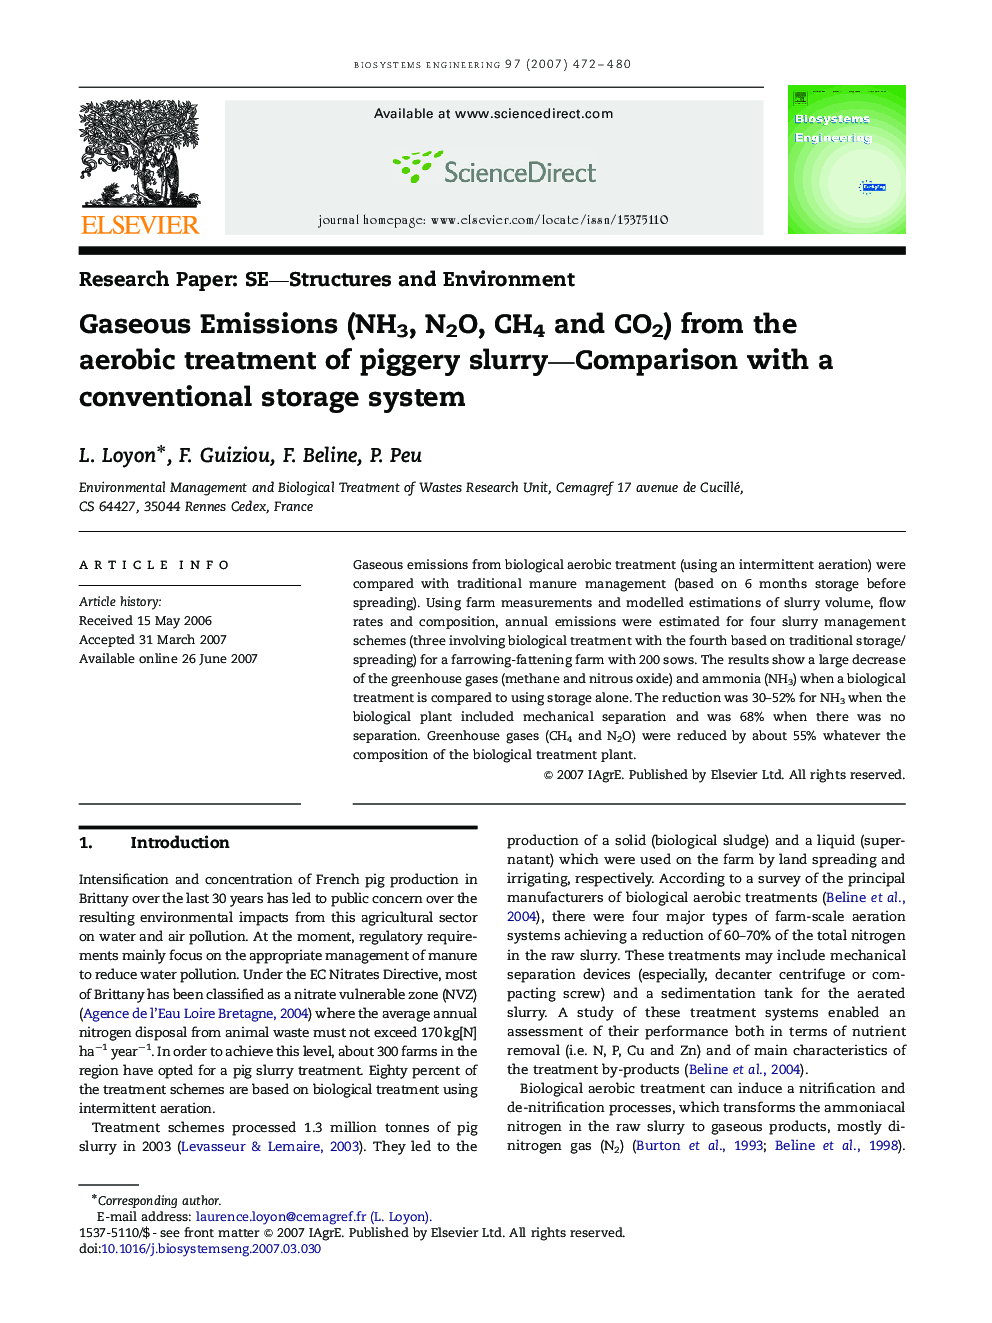 Gaseous Emissions (NH3, N2O, CH4 and CO2) from the aerobic treatment of piggery slurry—Comparison with a conventional storage system